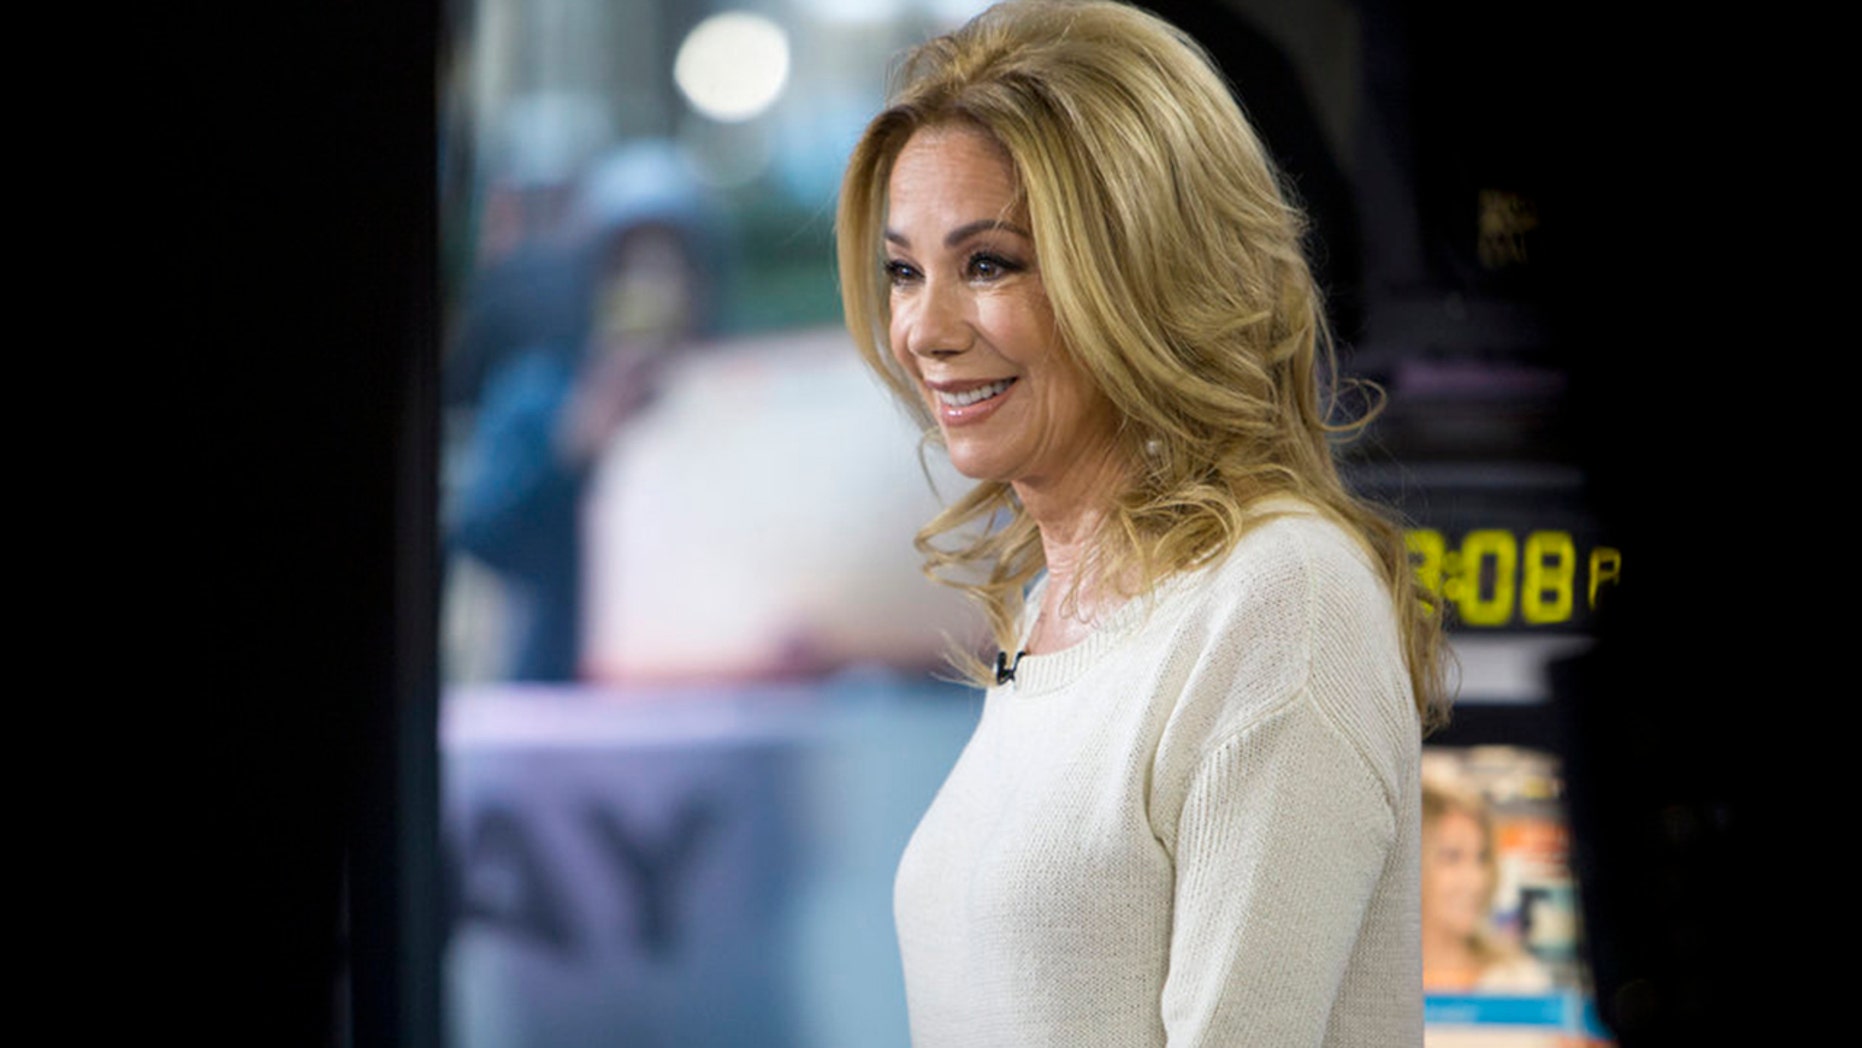 kathie lee gifford turned down date because 'didn't share my